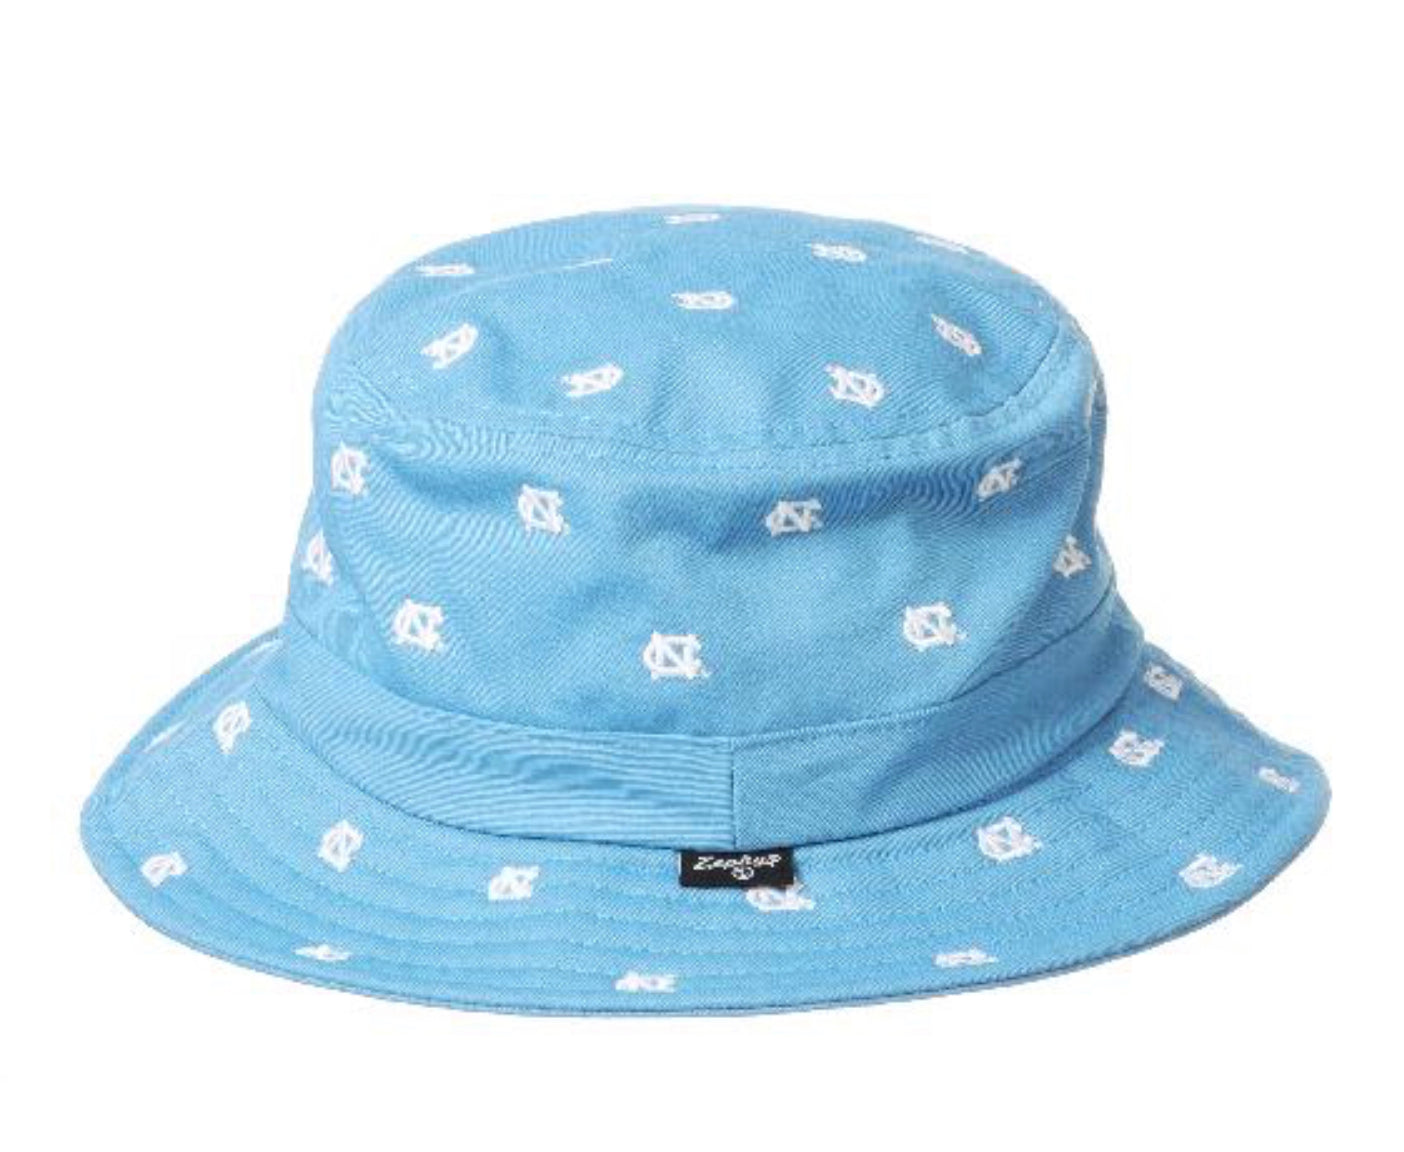 UNC Logo Bucket Hat with Scatter Print